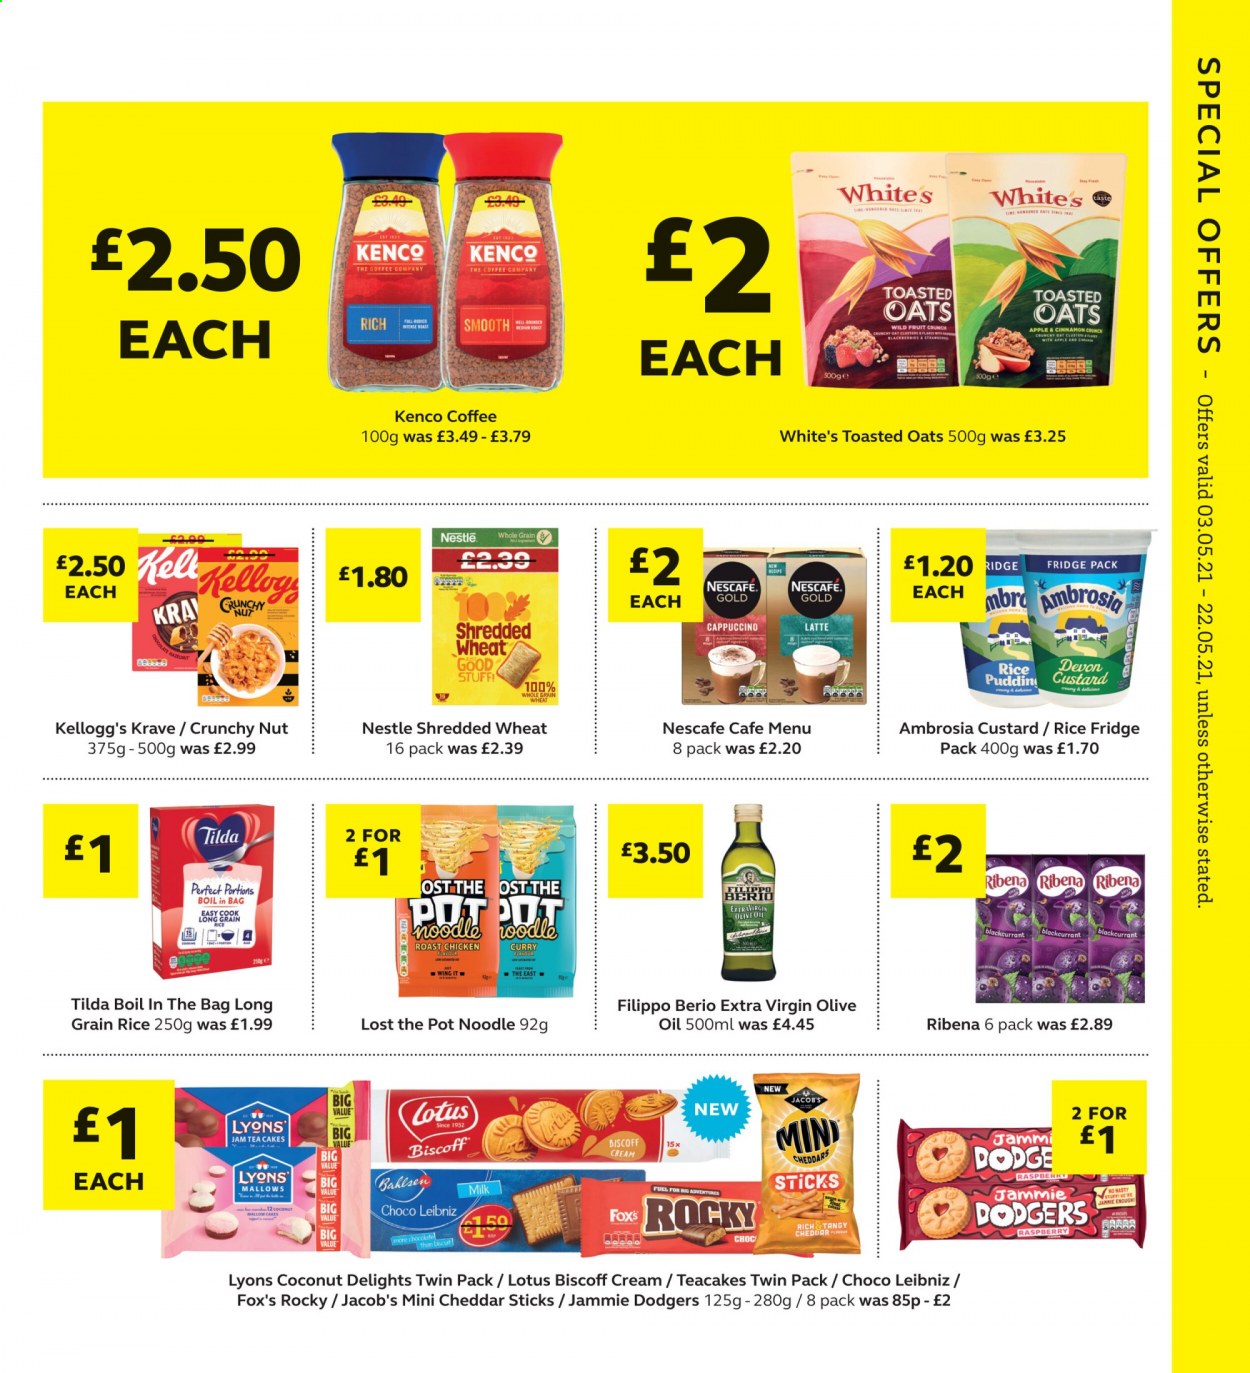 thumbnail - SuperValu offer  - 03/05/2021 - 22/05/2021 - Sales products - coconut, cake, chicken roast, noodles, cheddar, custard, pudding, milk, marshmallows, Nestlé, Kellogg's, toasted oats, rice, long grain rice, cinnamon, extra virgin olive oil, olive oil, oil, fruit jam, tea, Lyons, cappuccino, coffee, Nescafé, Lotus, pot. Page 7.